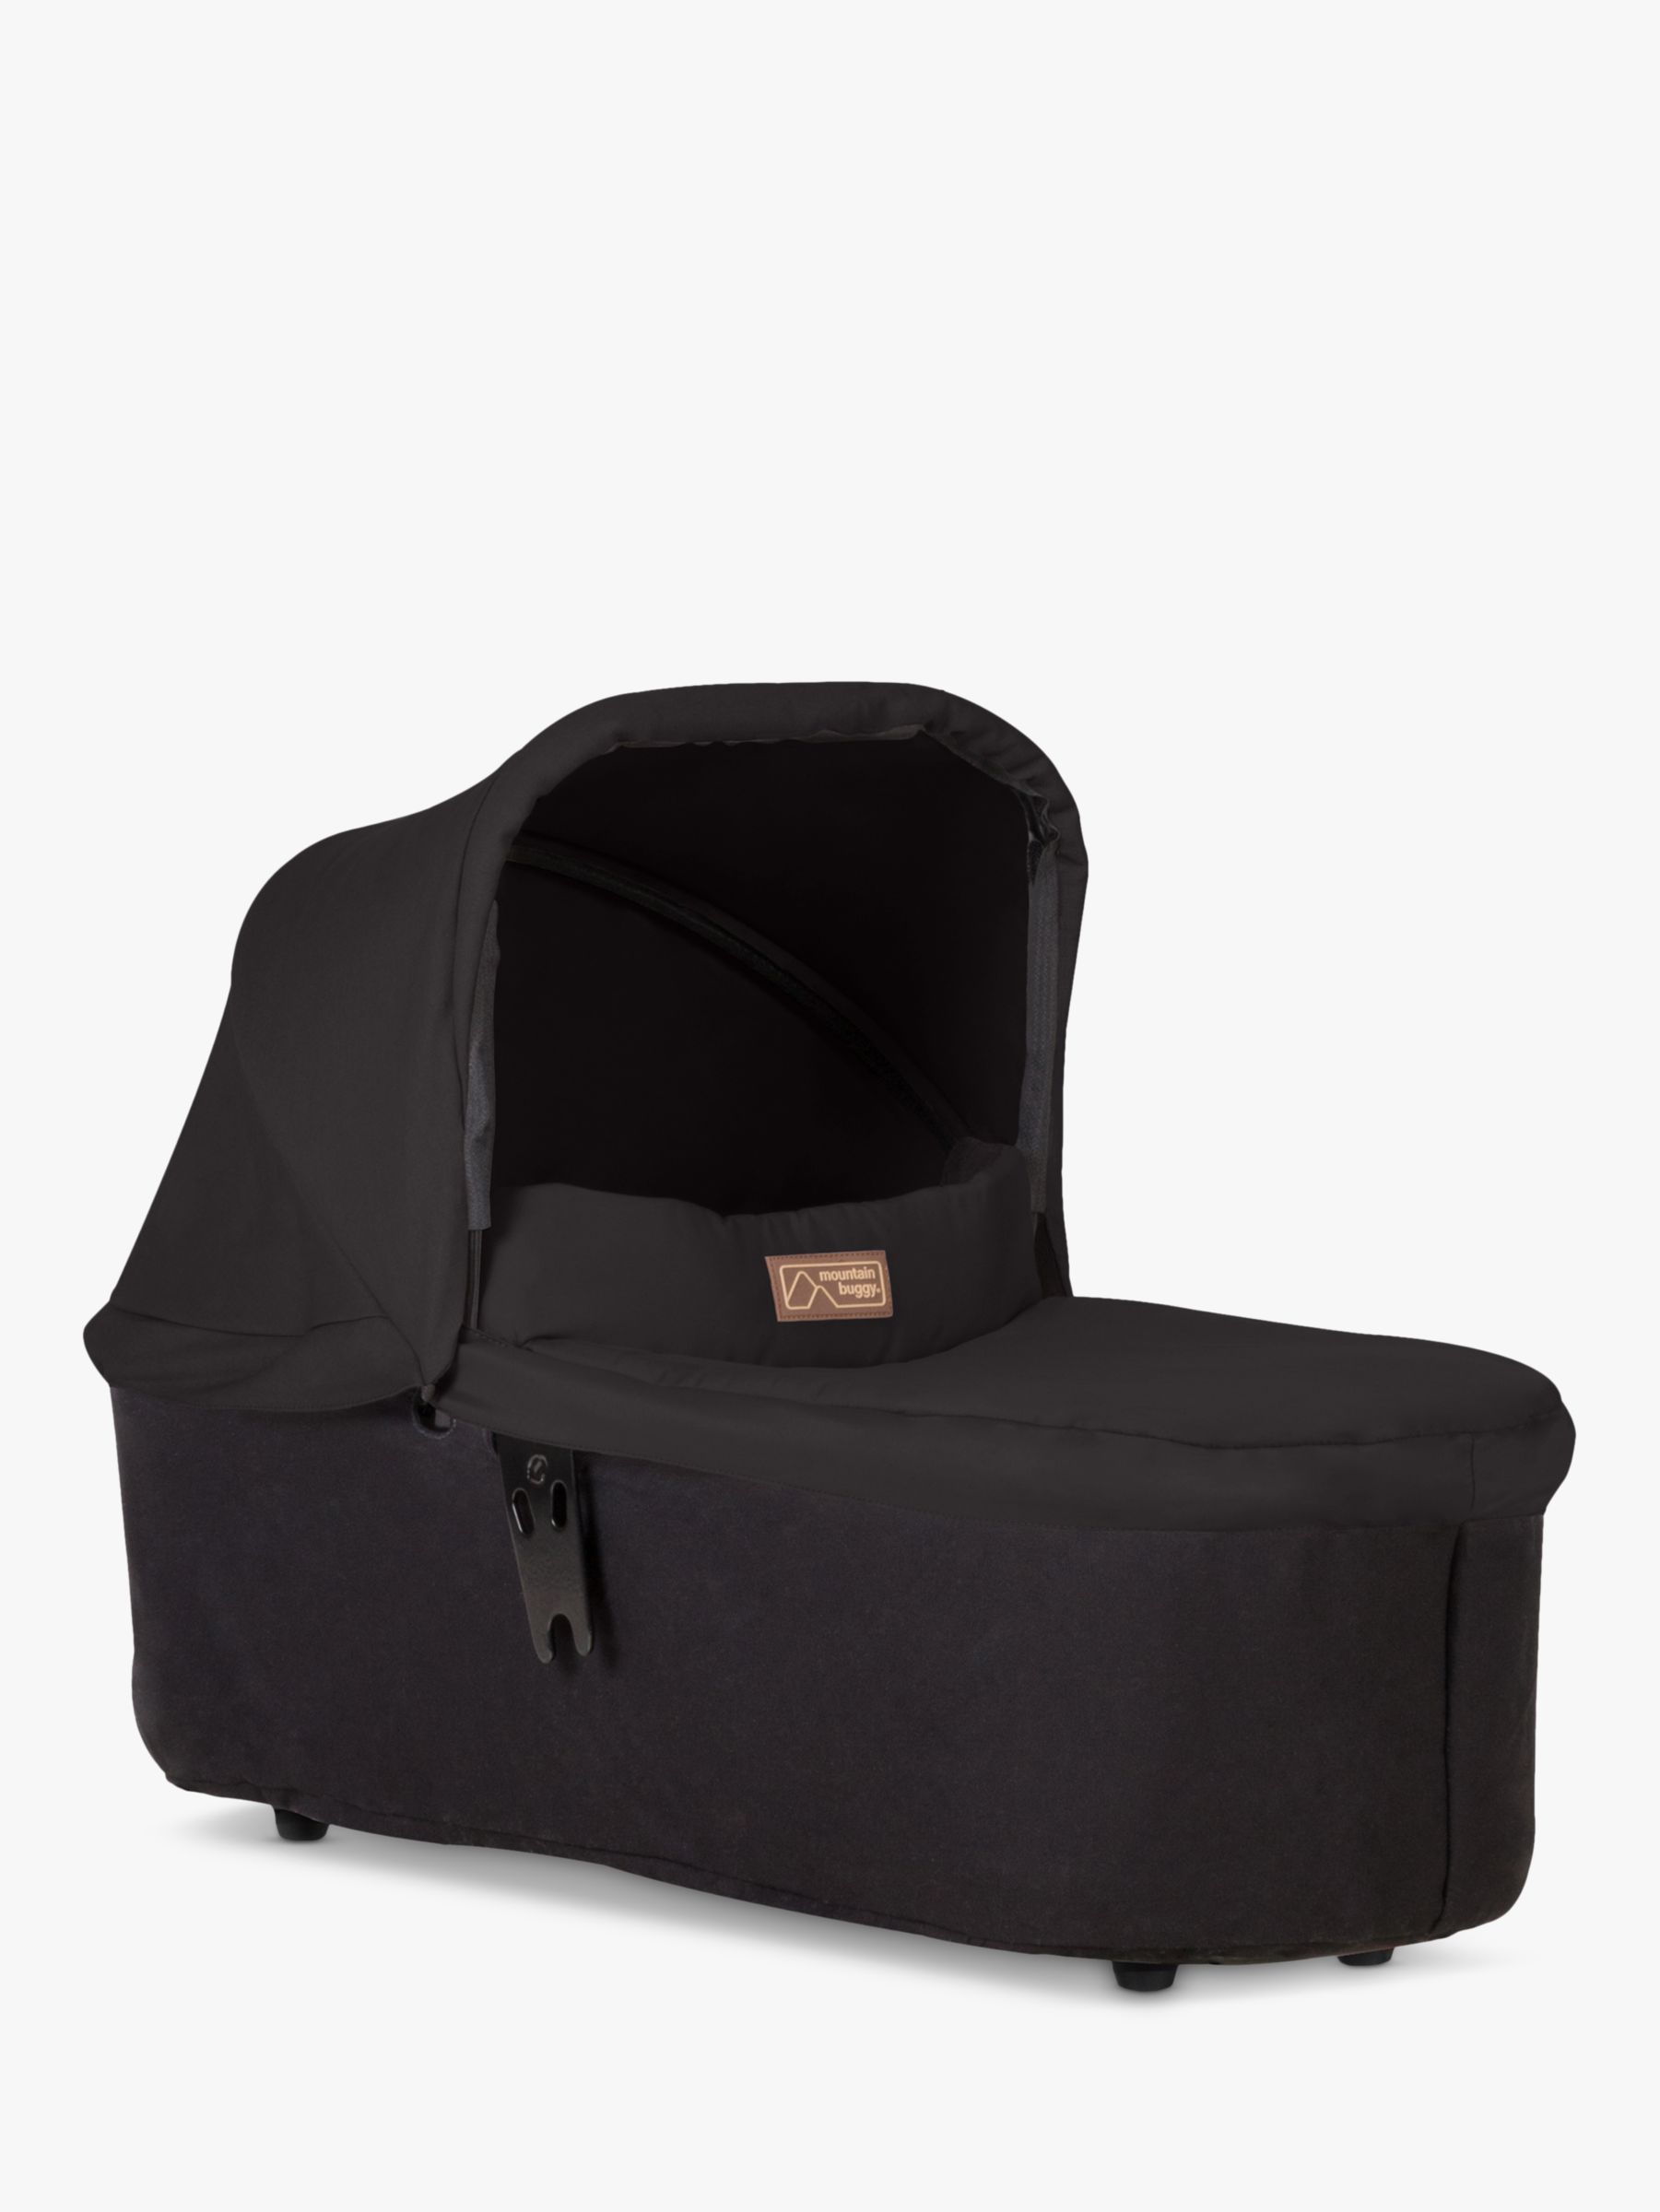 Image of Mountain Buggy Duet Carrycot Plus Black